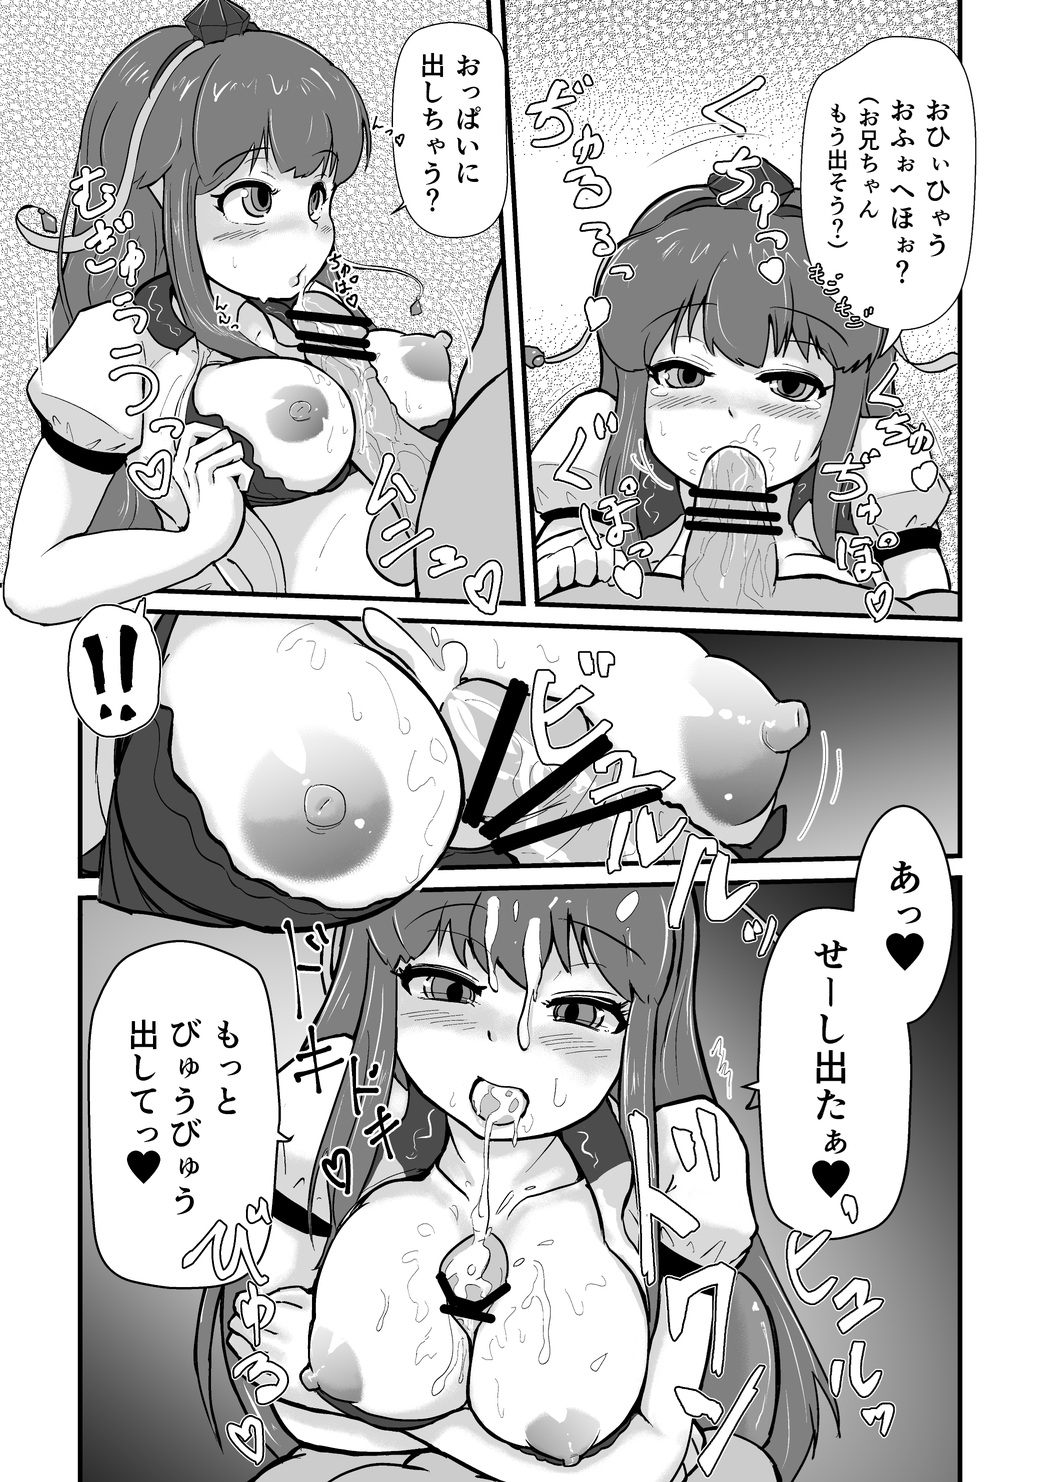 [Carbon Rice] M.C. 咲沙良ちゃん (Touhou Project) [Digital] page 10 full